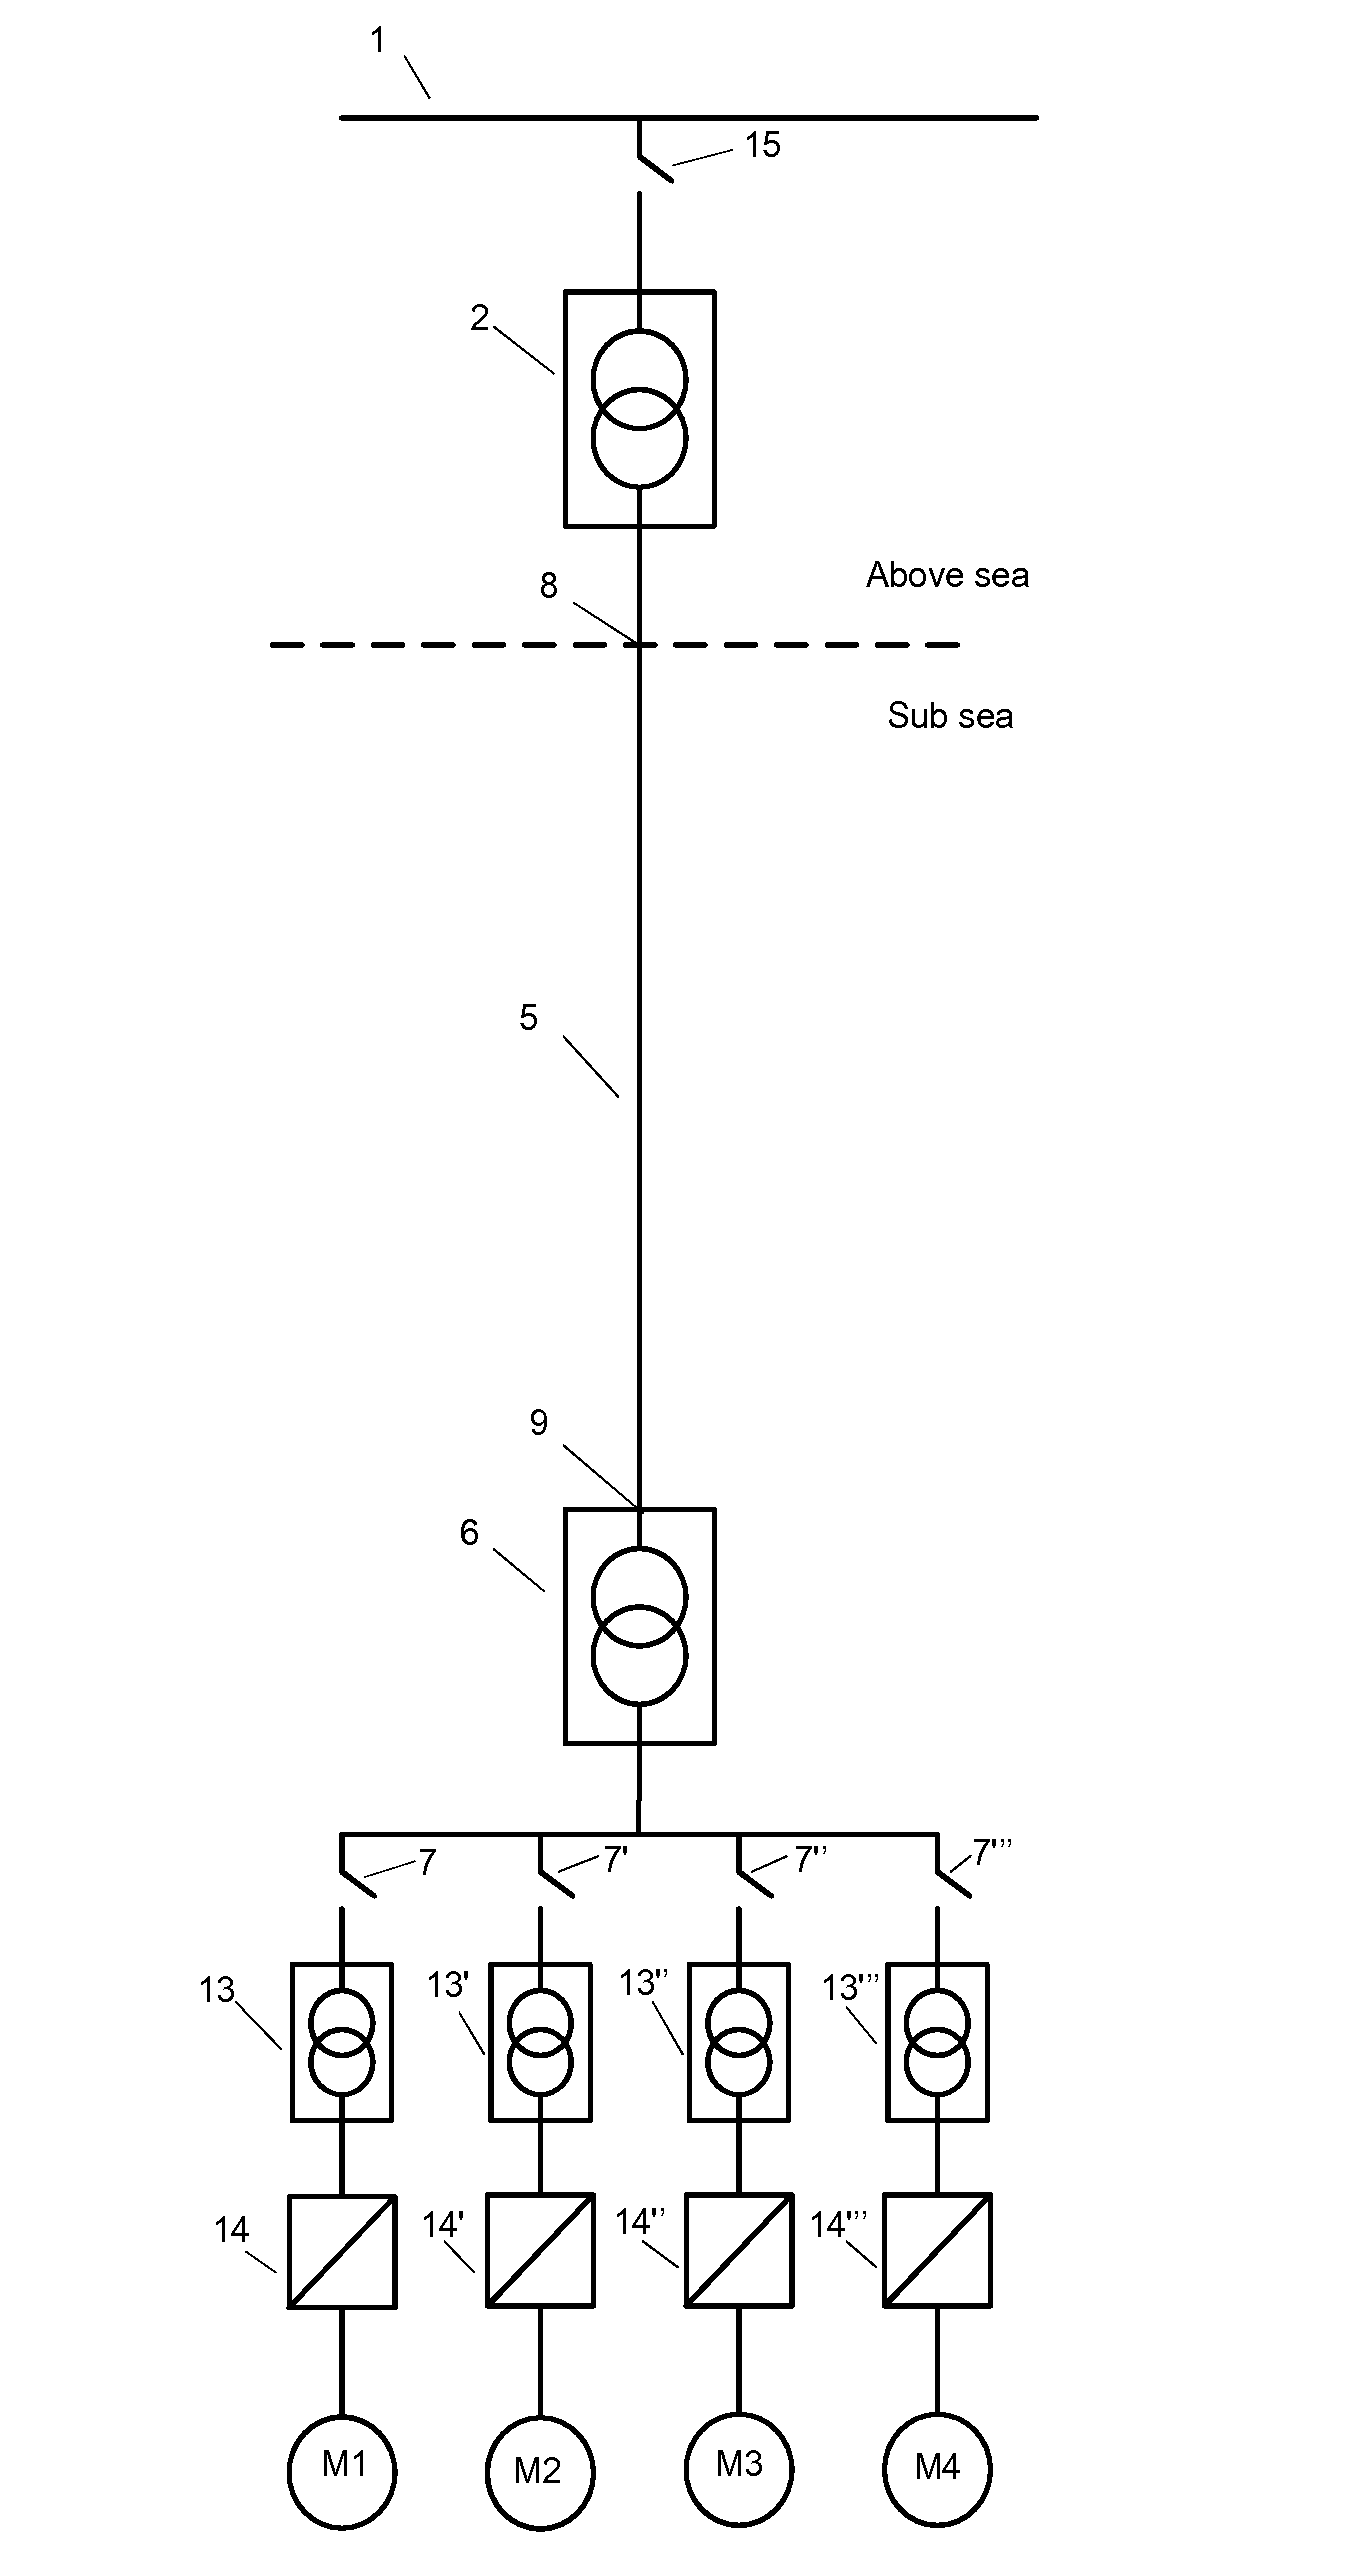 Device for stable subsea electric power transmission to run subsea high speed motors or other subsea loads